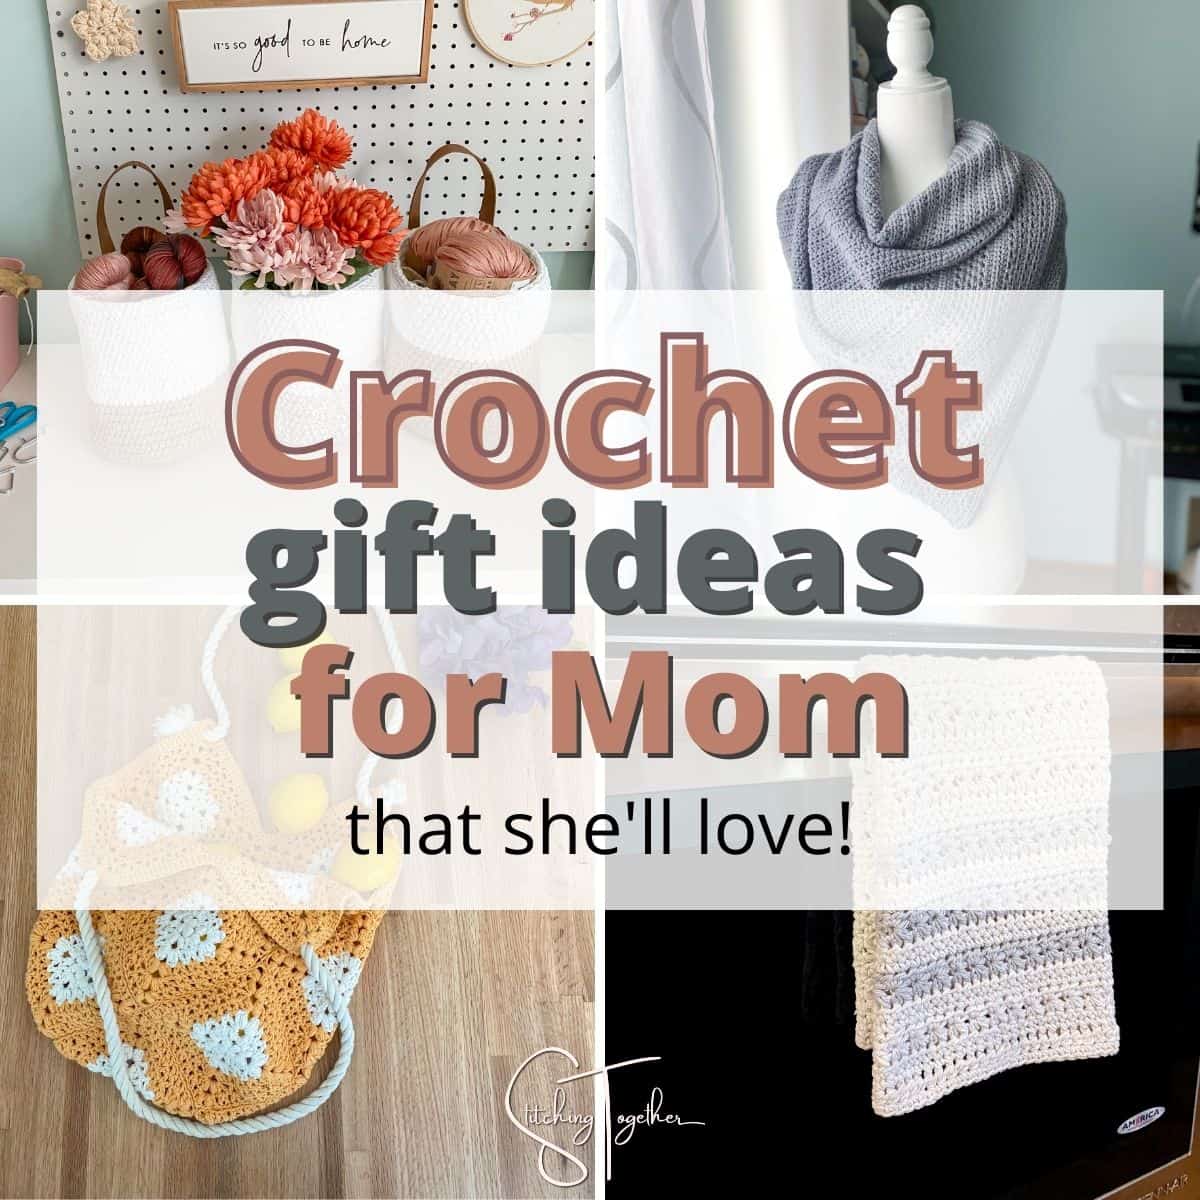 Crochet Lighter Holder, Stylish and Functional Accessory